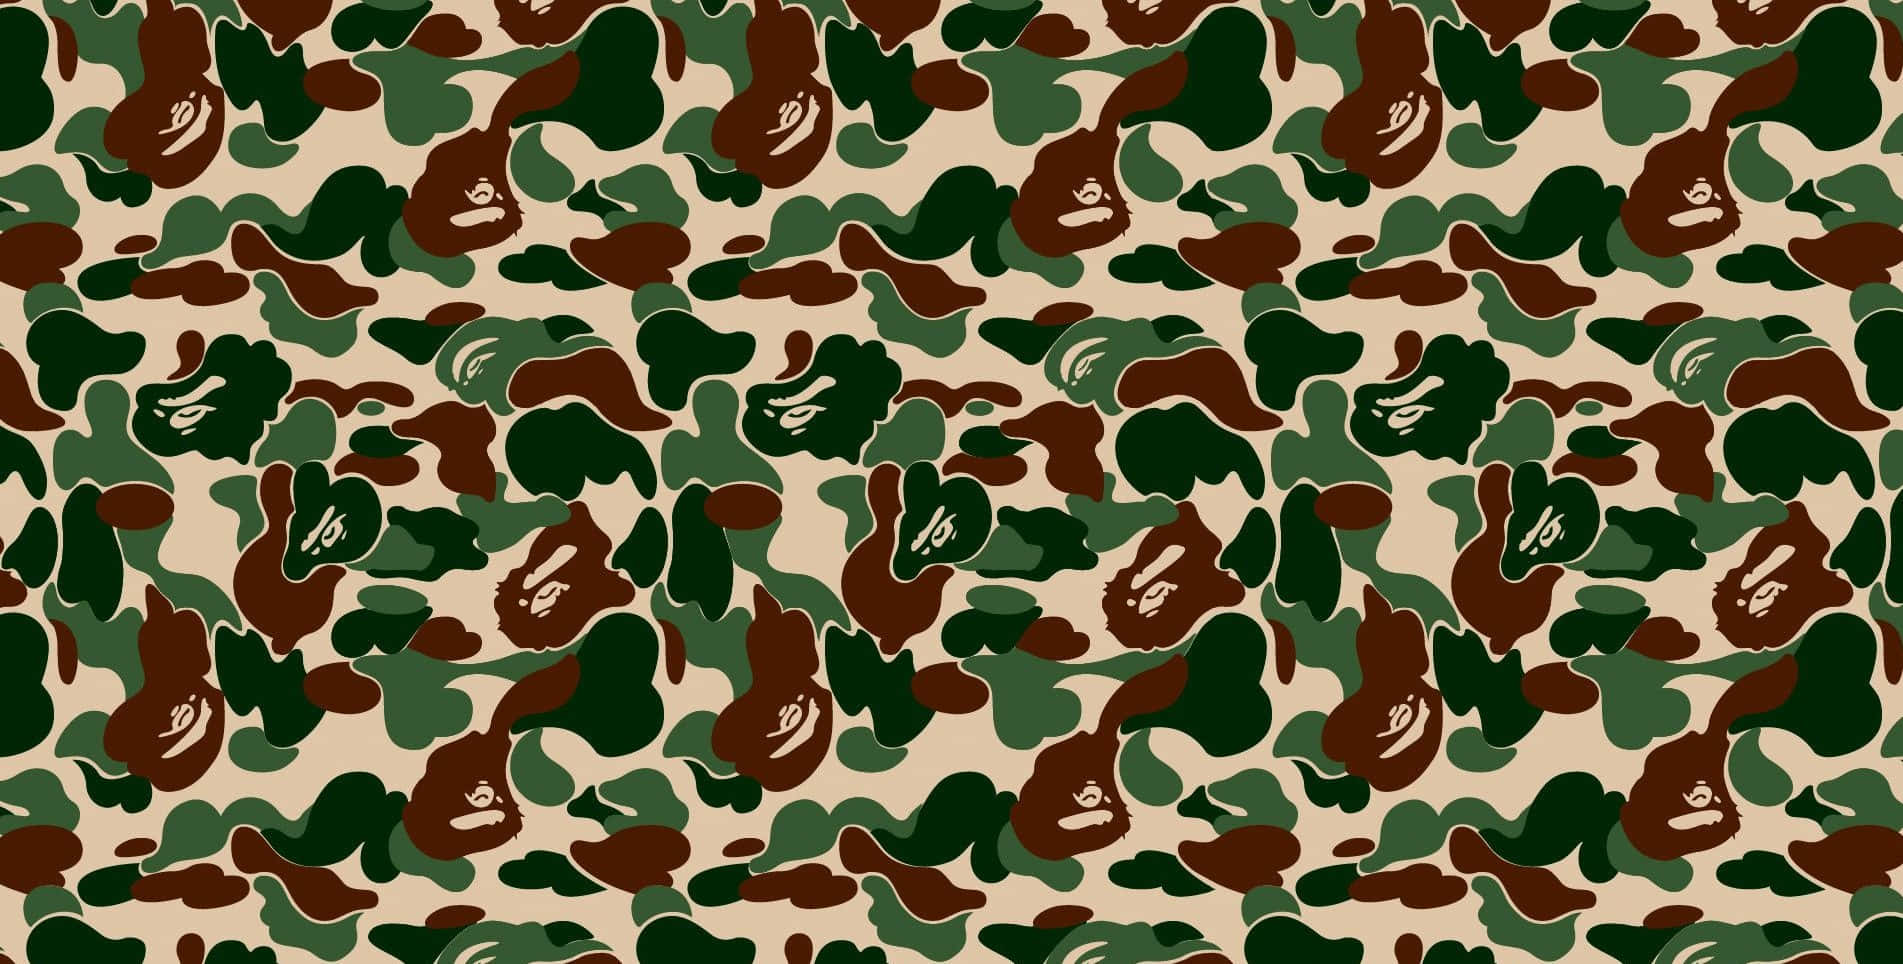 A Camouflage Pattern With Brown And Green Colors